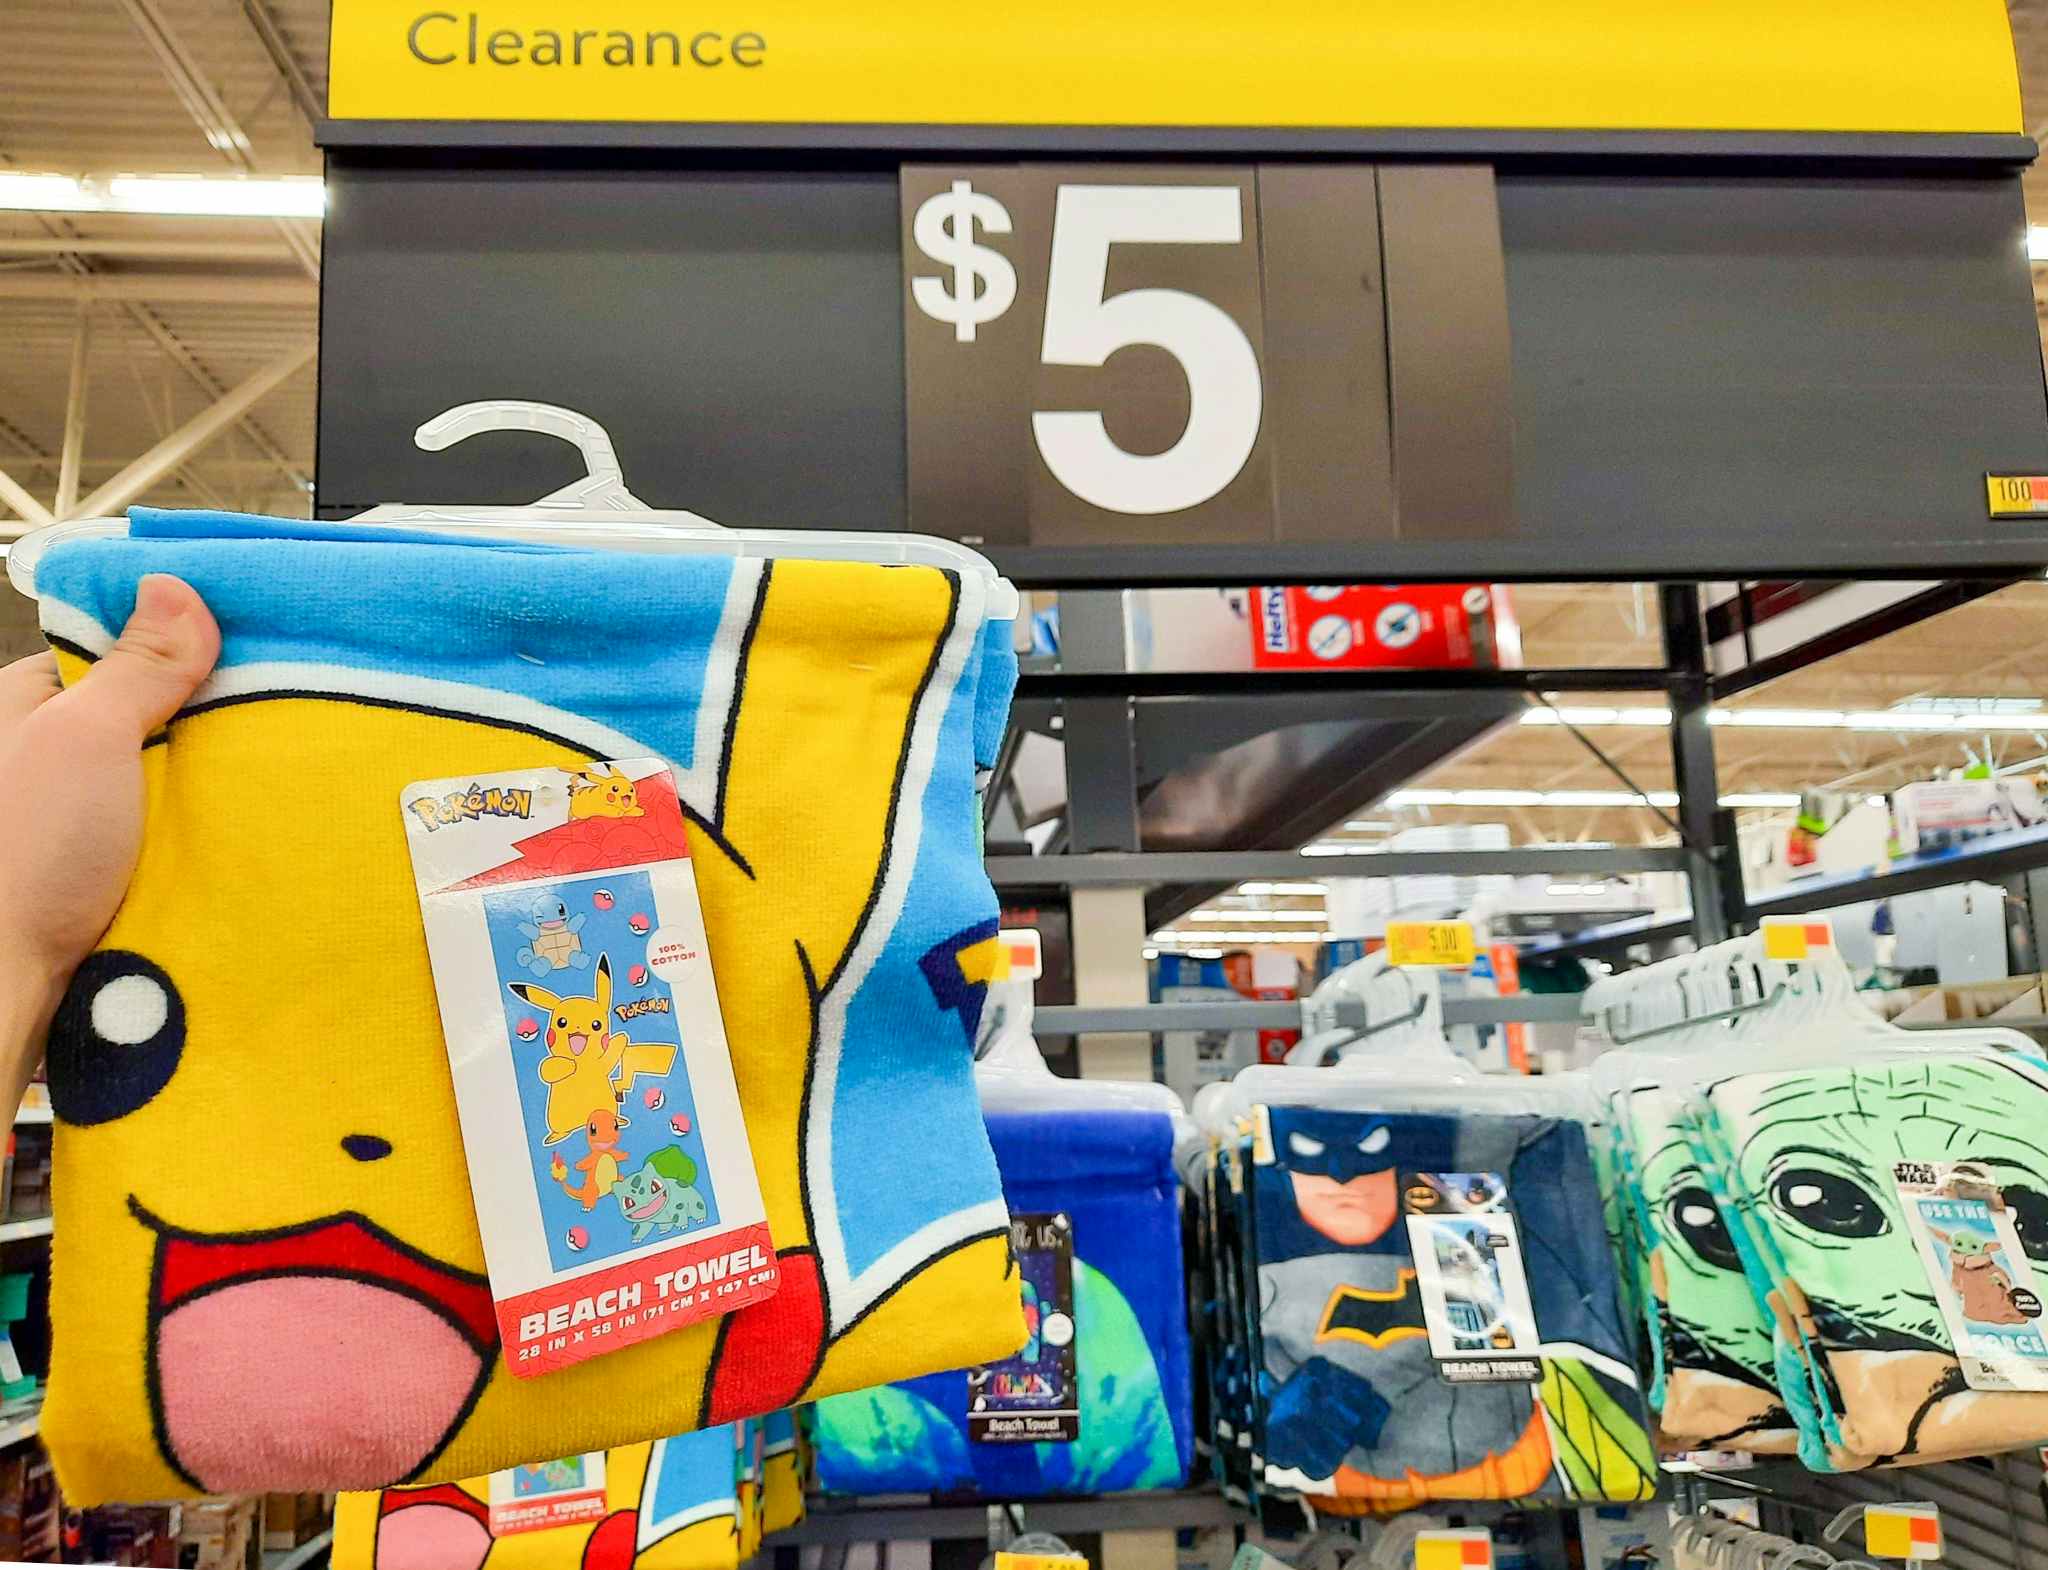 Pokemon Beach Towel held in front of $5 clearance sign.